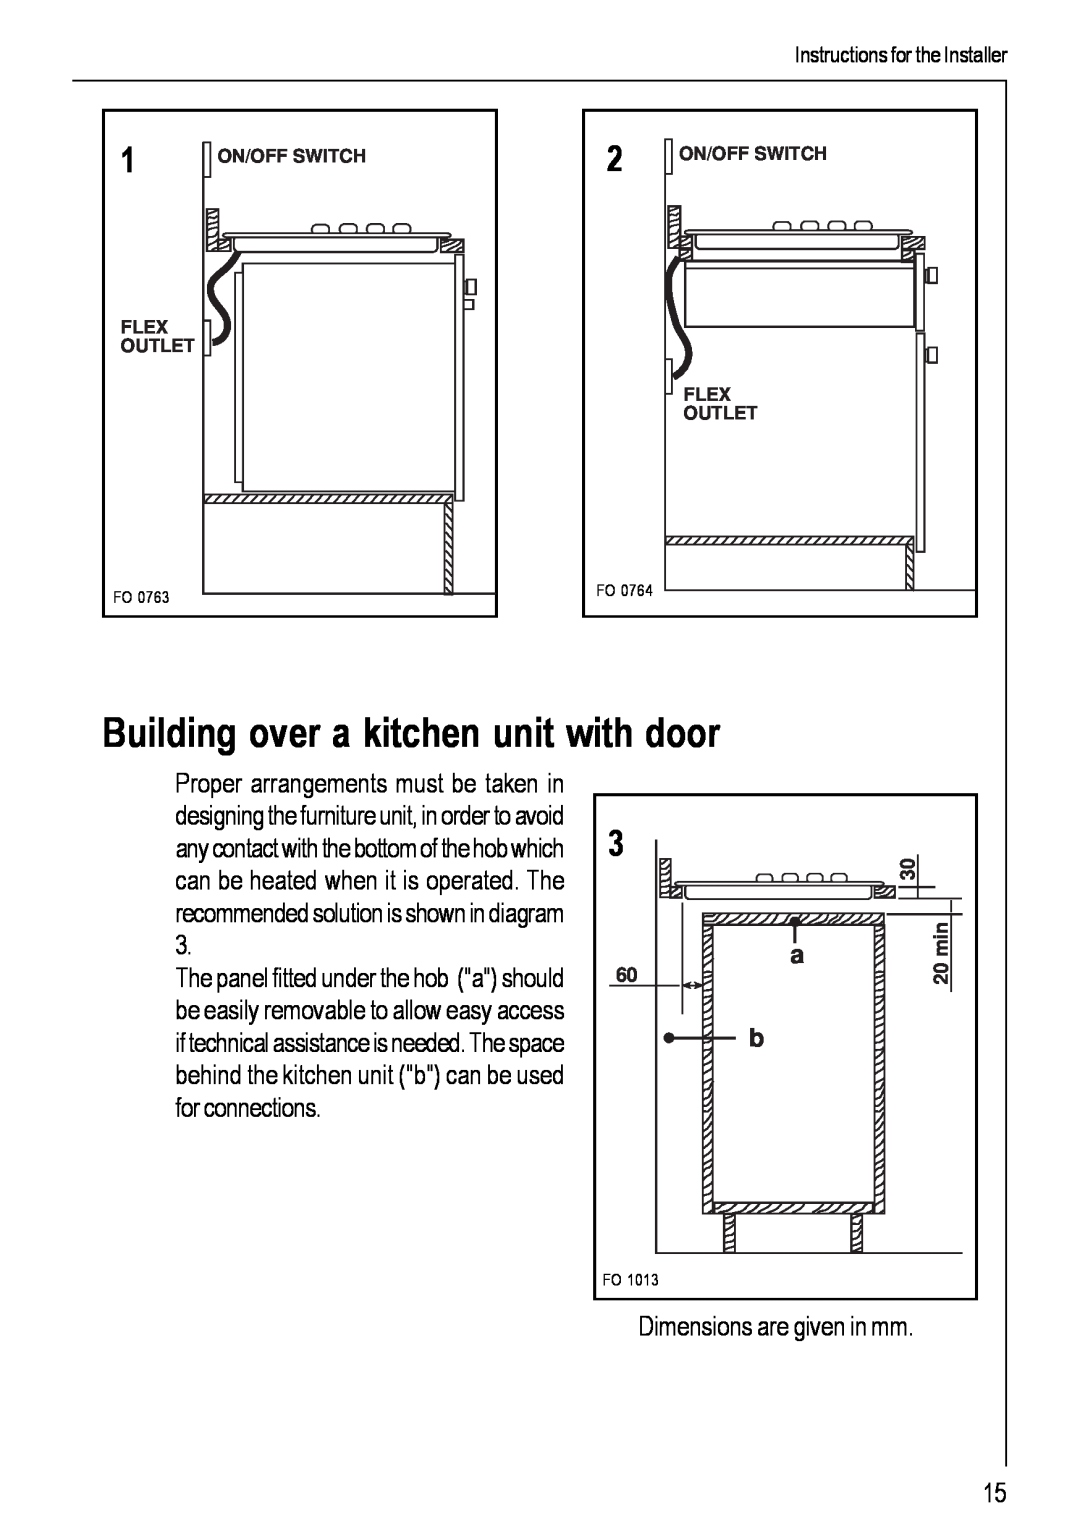 Electrolux 99852 G manual Building over a kitchen unit with door, Dimensions are given in mm 